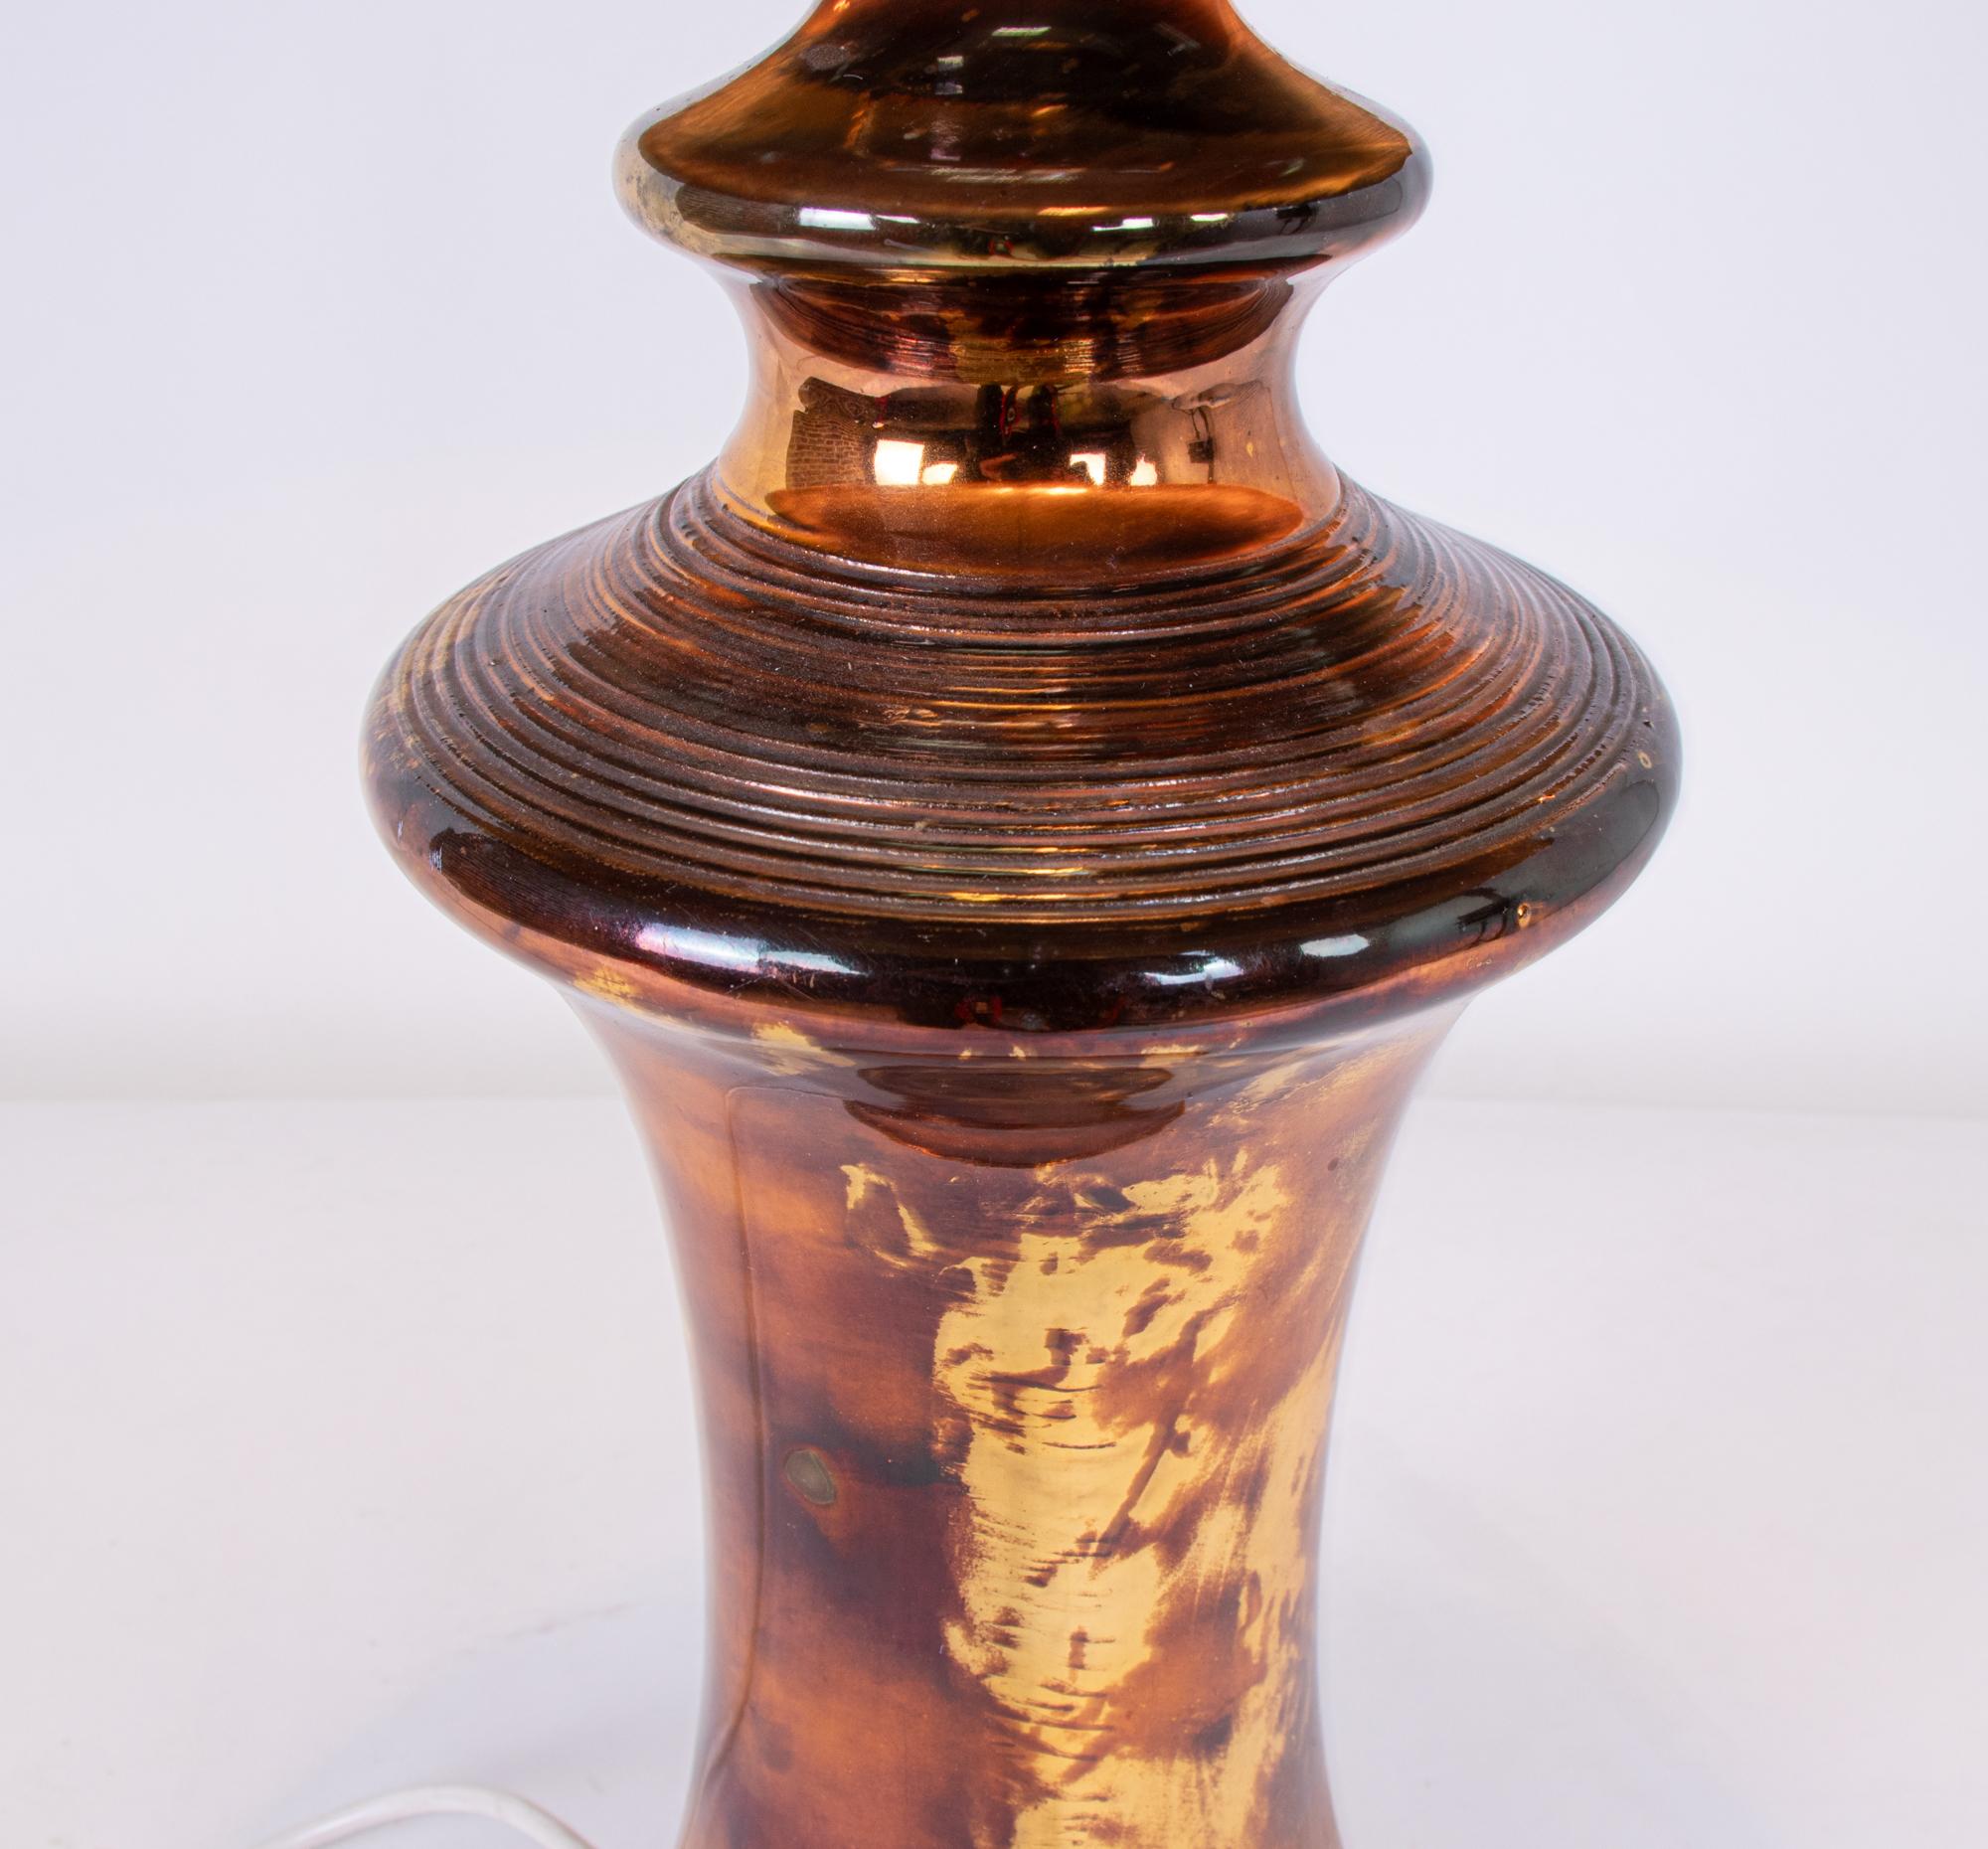 Hand-Crafted Bitossi Table Lamp in Metallic Gold Ceramic, Italy 1960s For Sale